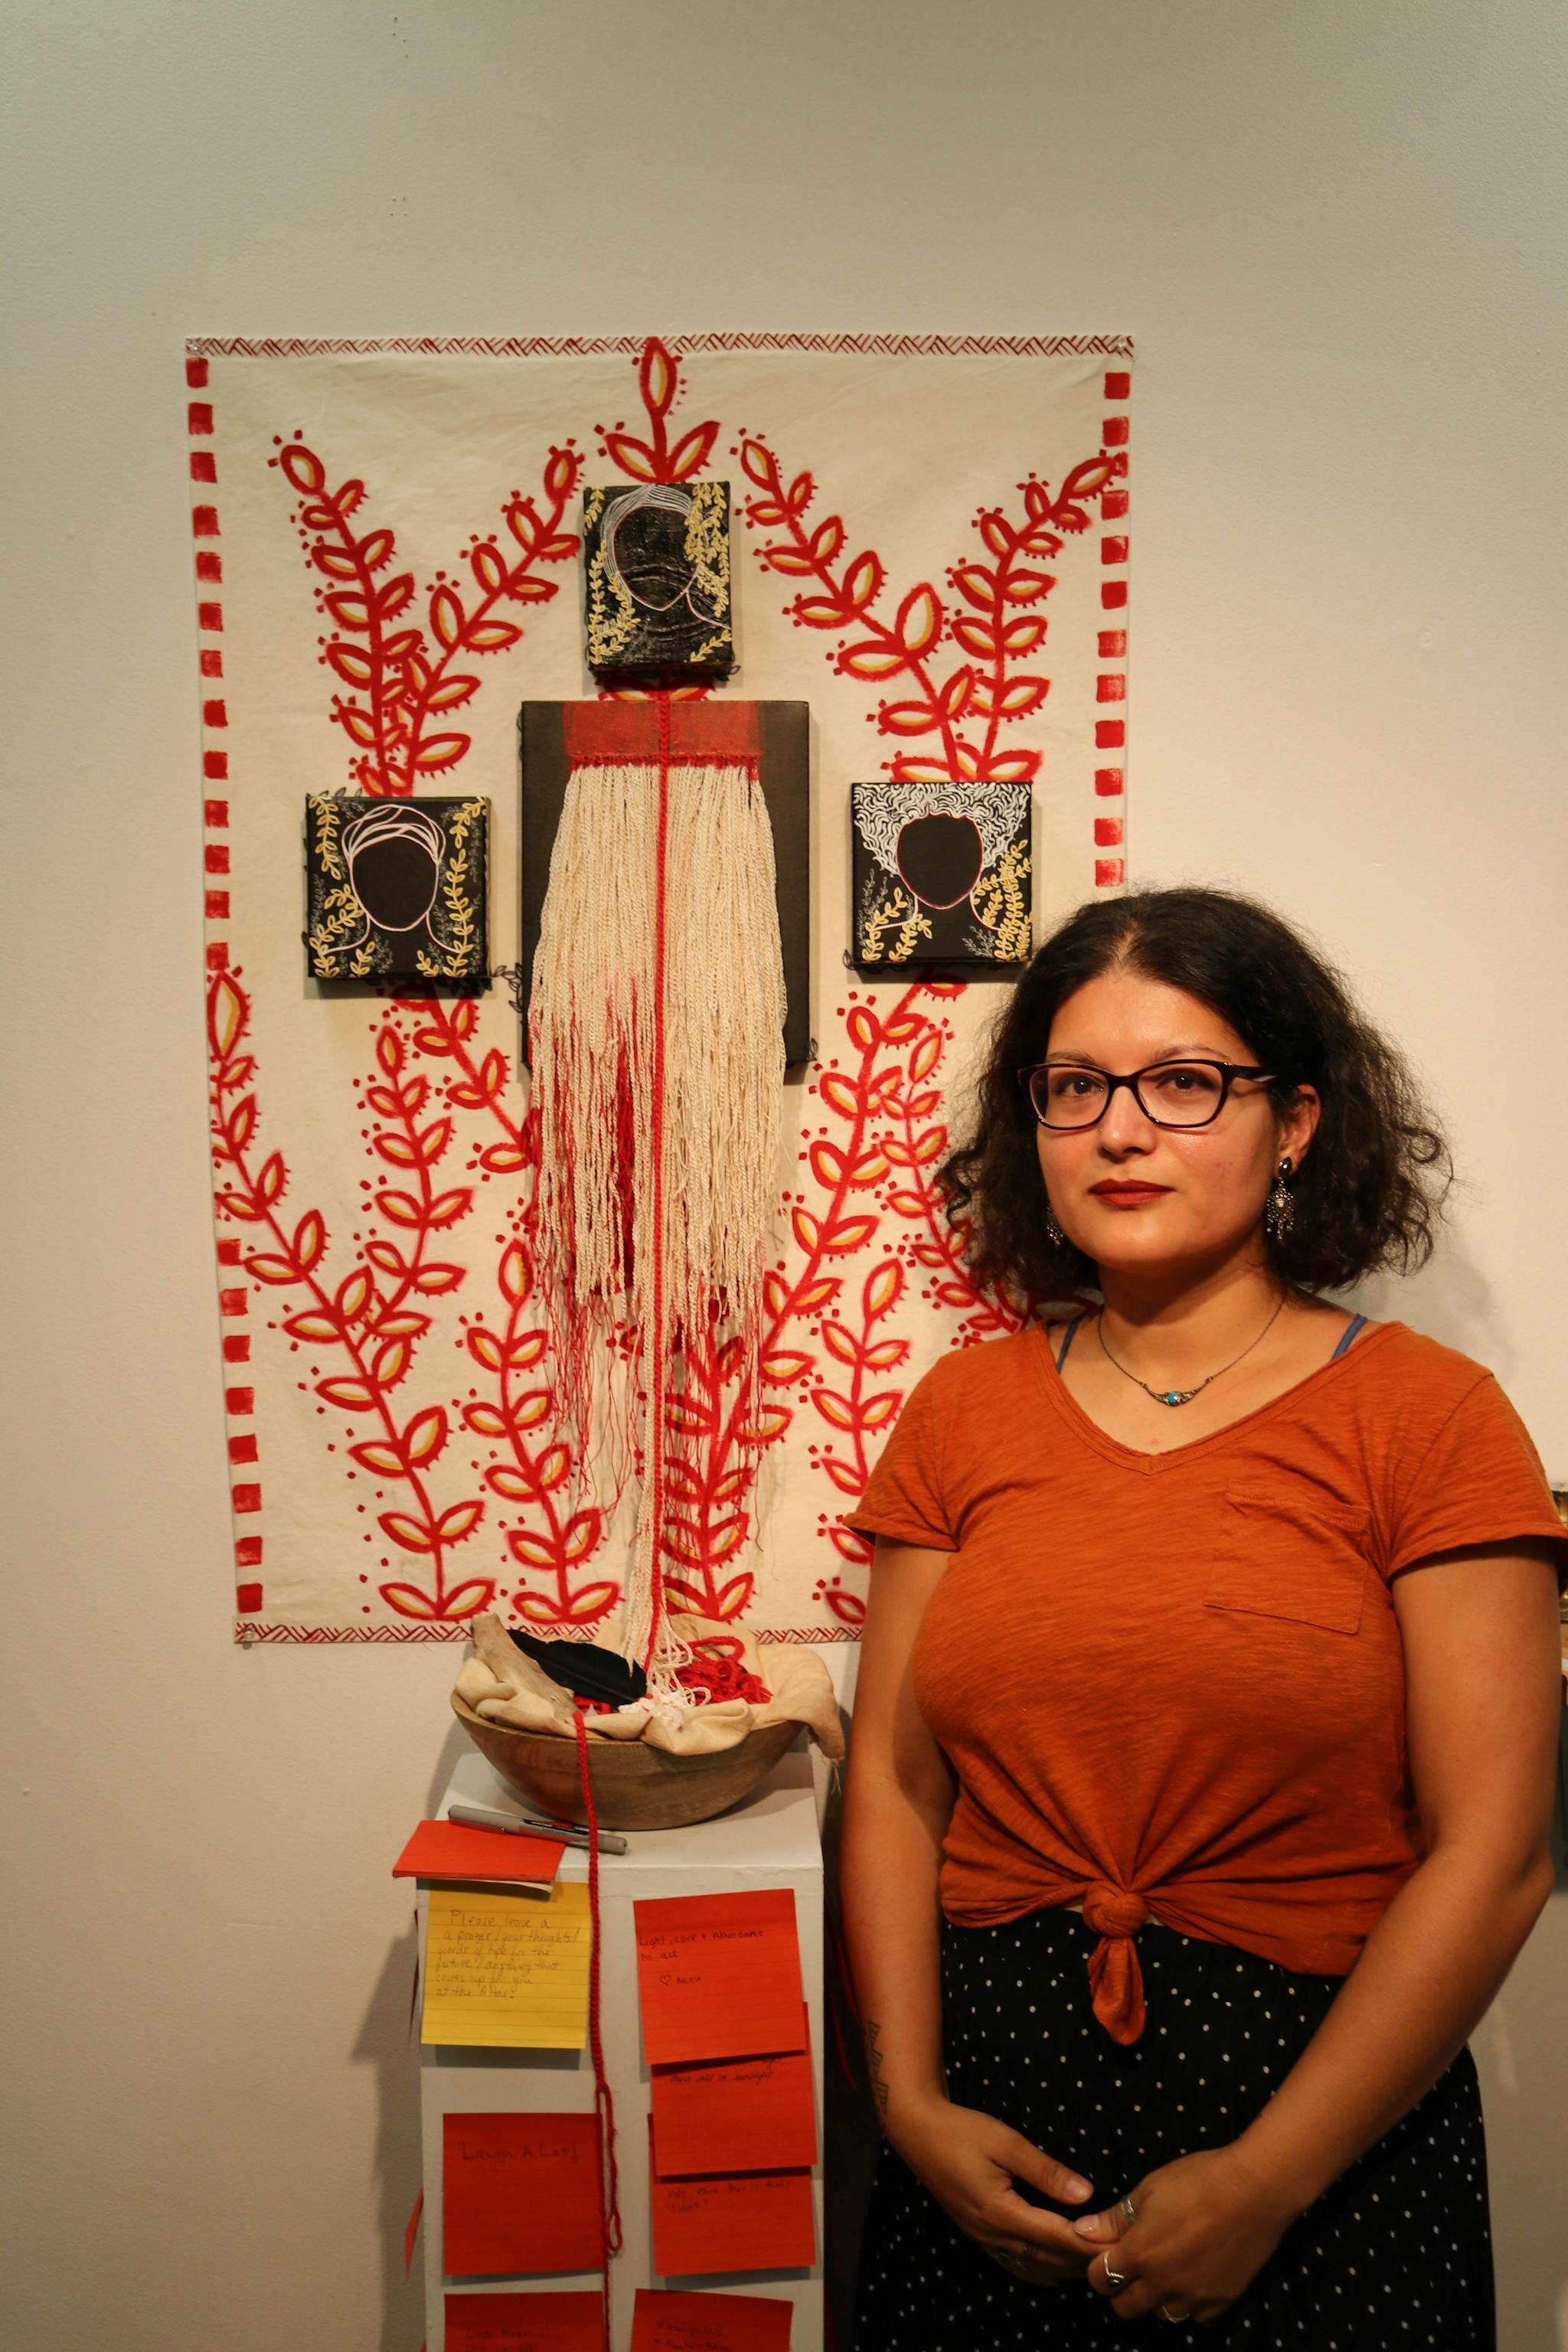 Ankana stands in front of a shrine she made, which features post-it notes and a fabric work hanging from the wall.